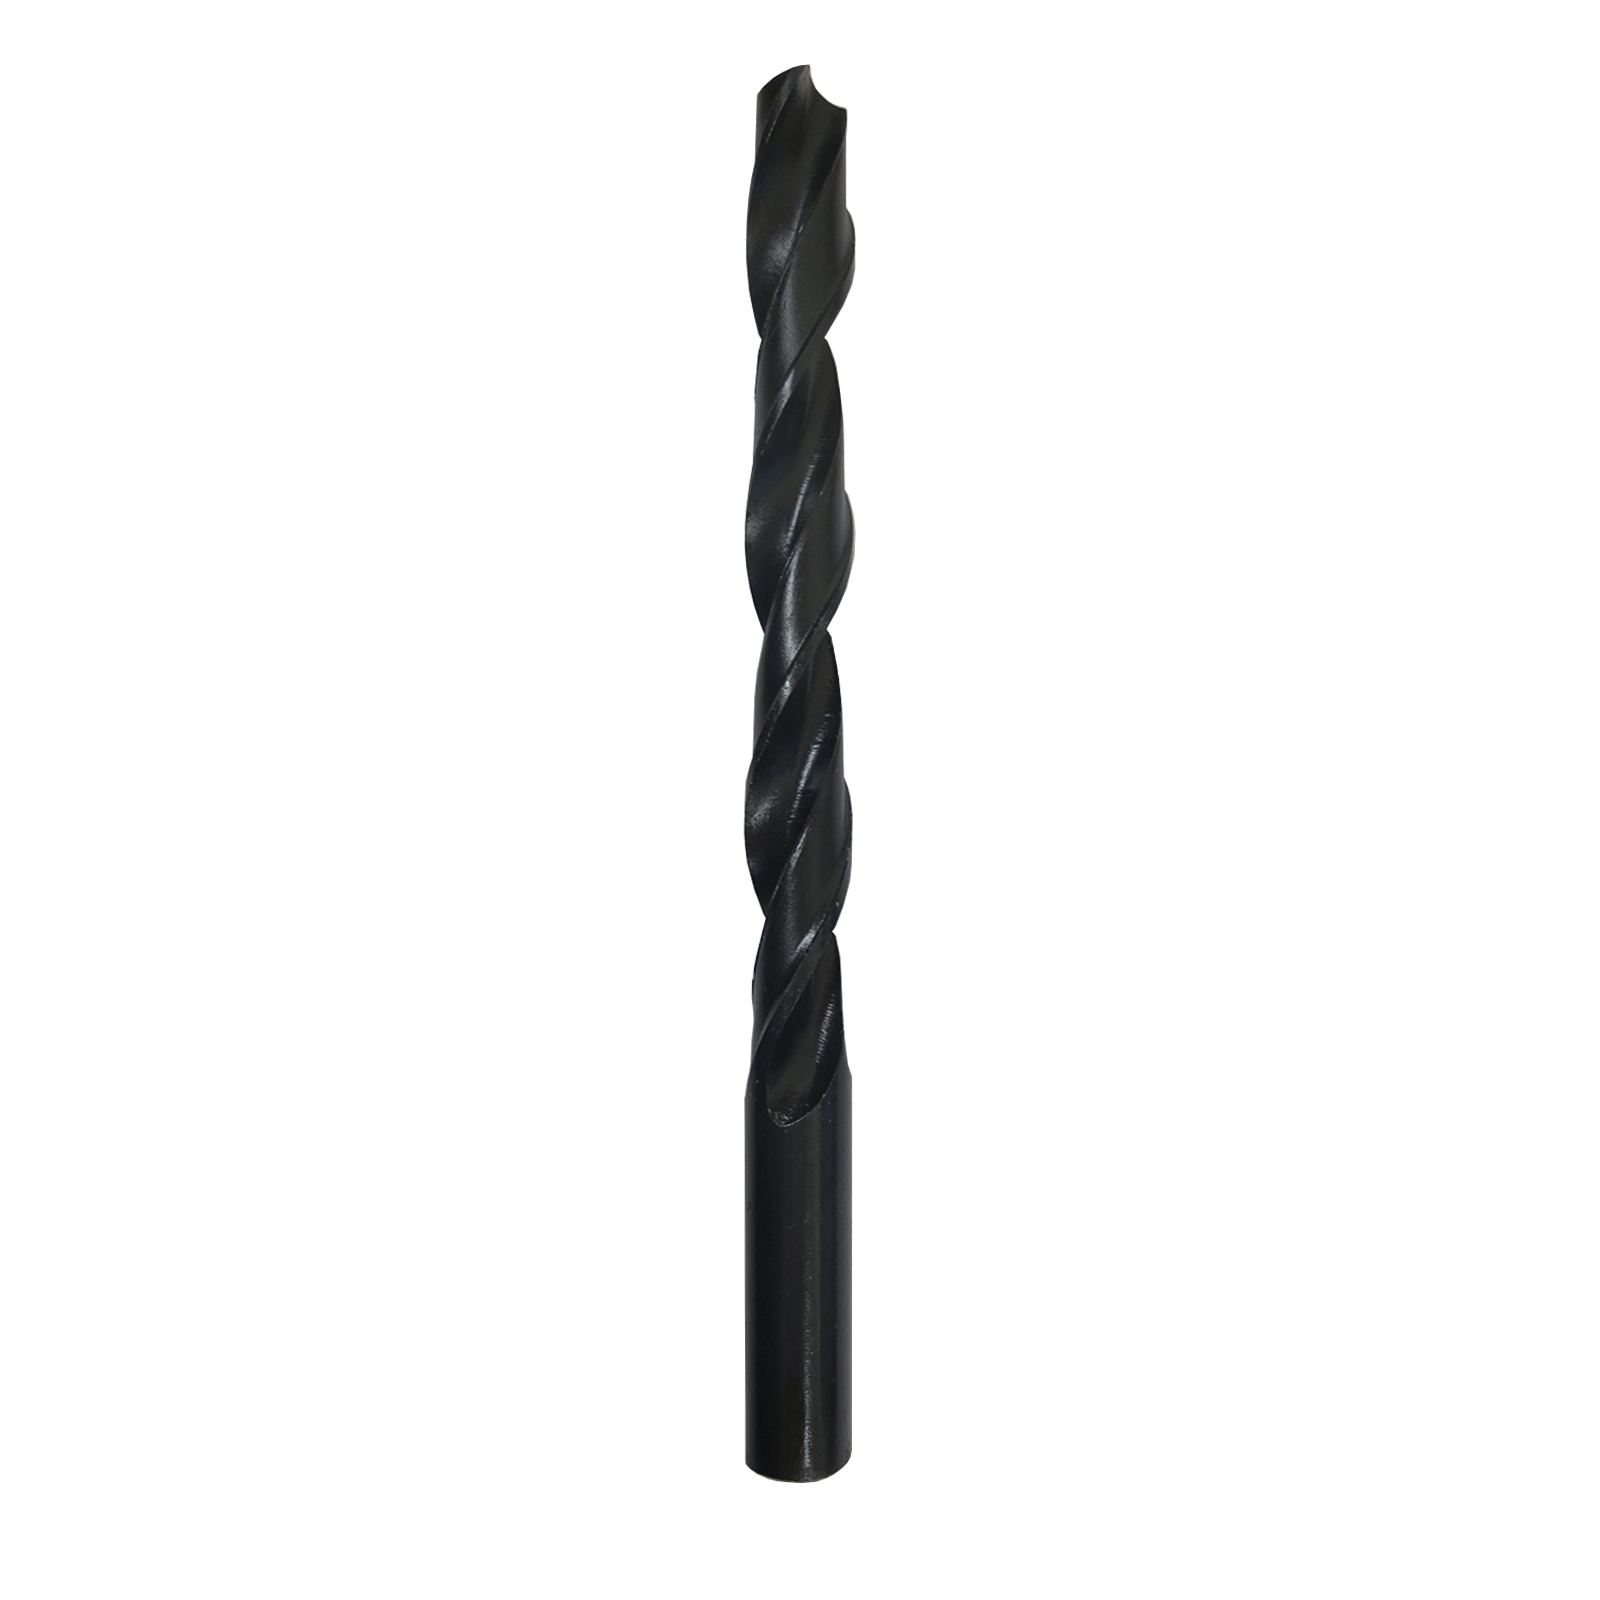 Gyros 45-41120 Premium (Made in US) Industrial HSS Black Oxide Drill Bit, 1/2", Pack of 6